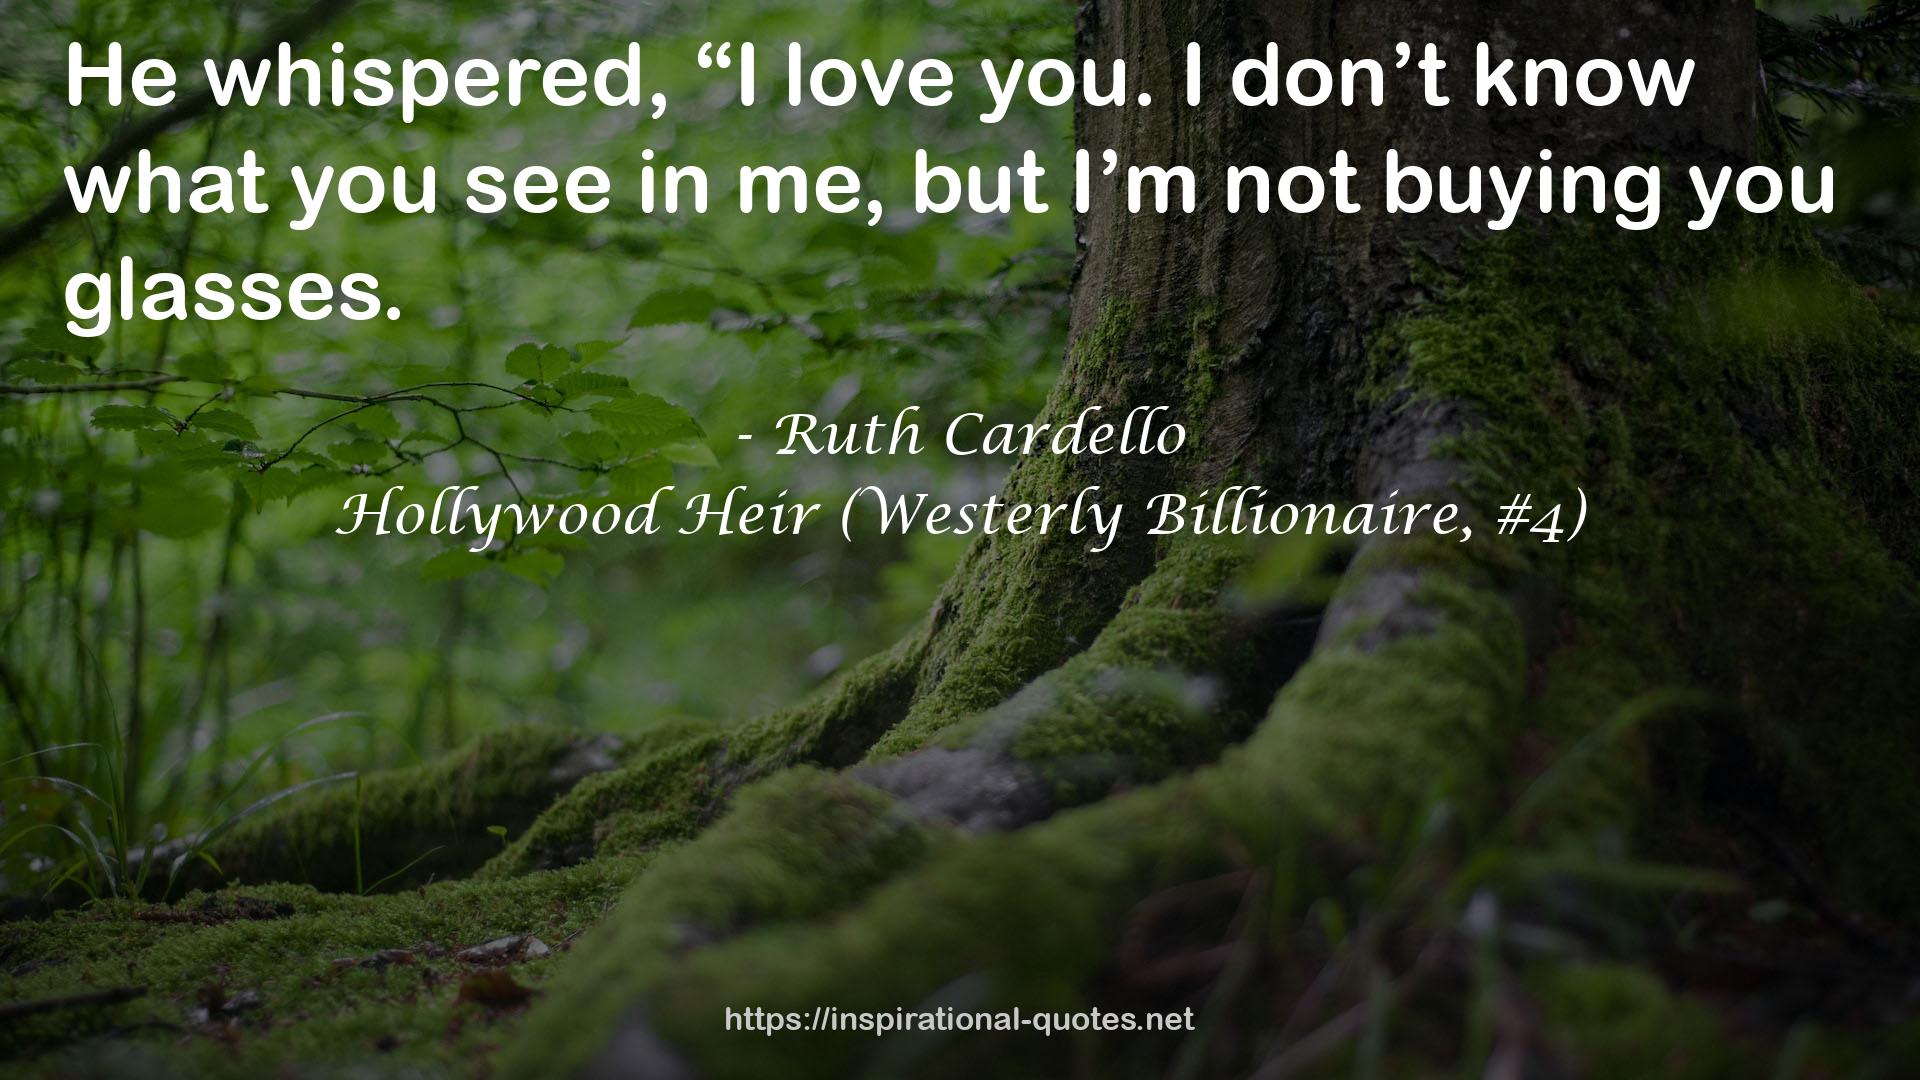 Hollywood Heir (Westerly Billionaire, #4) QUOTES